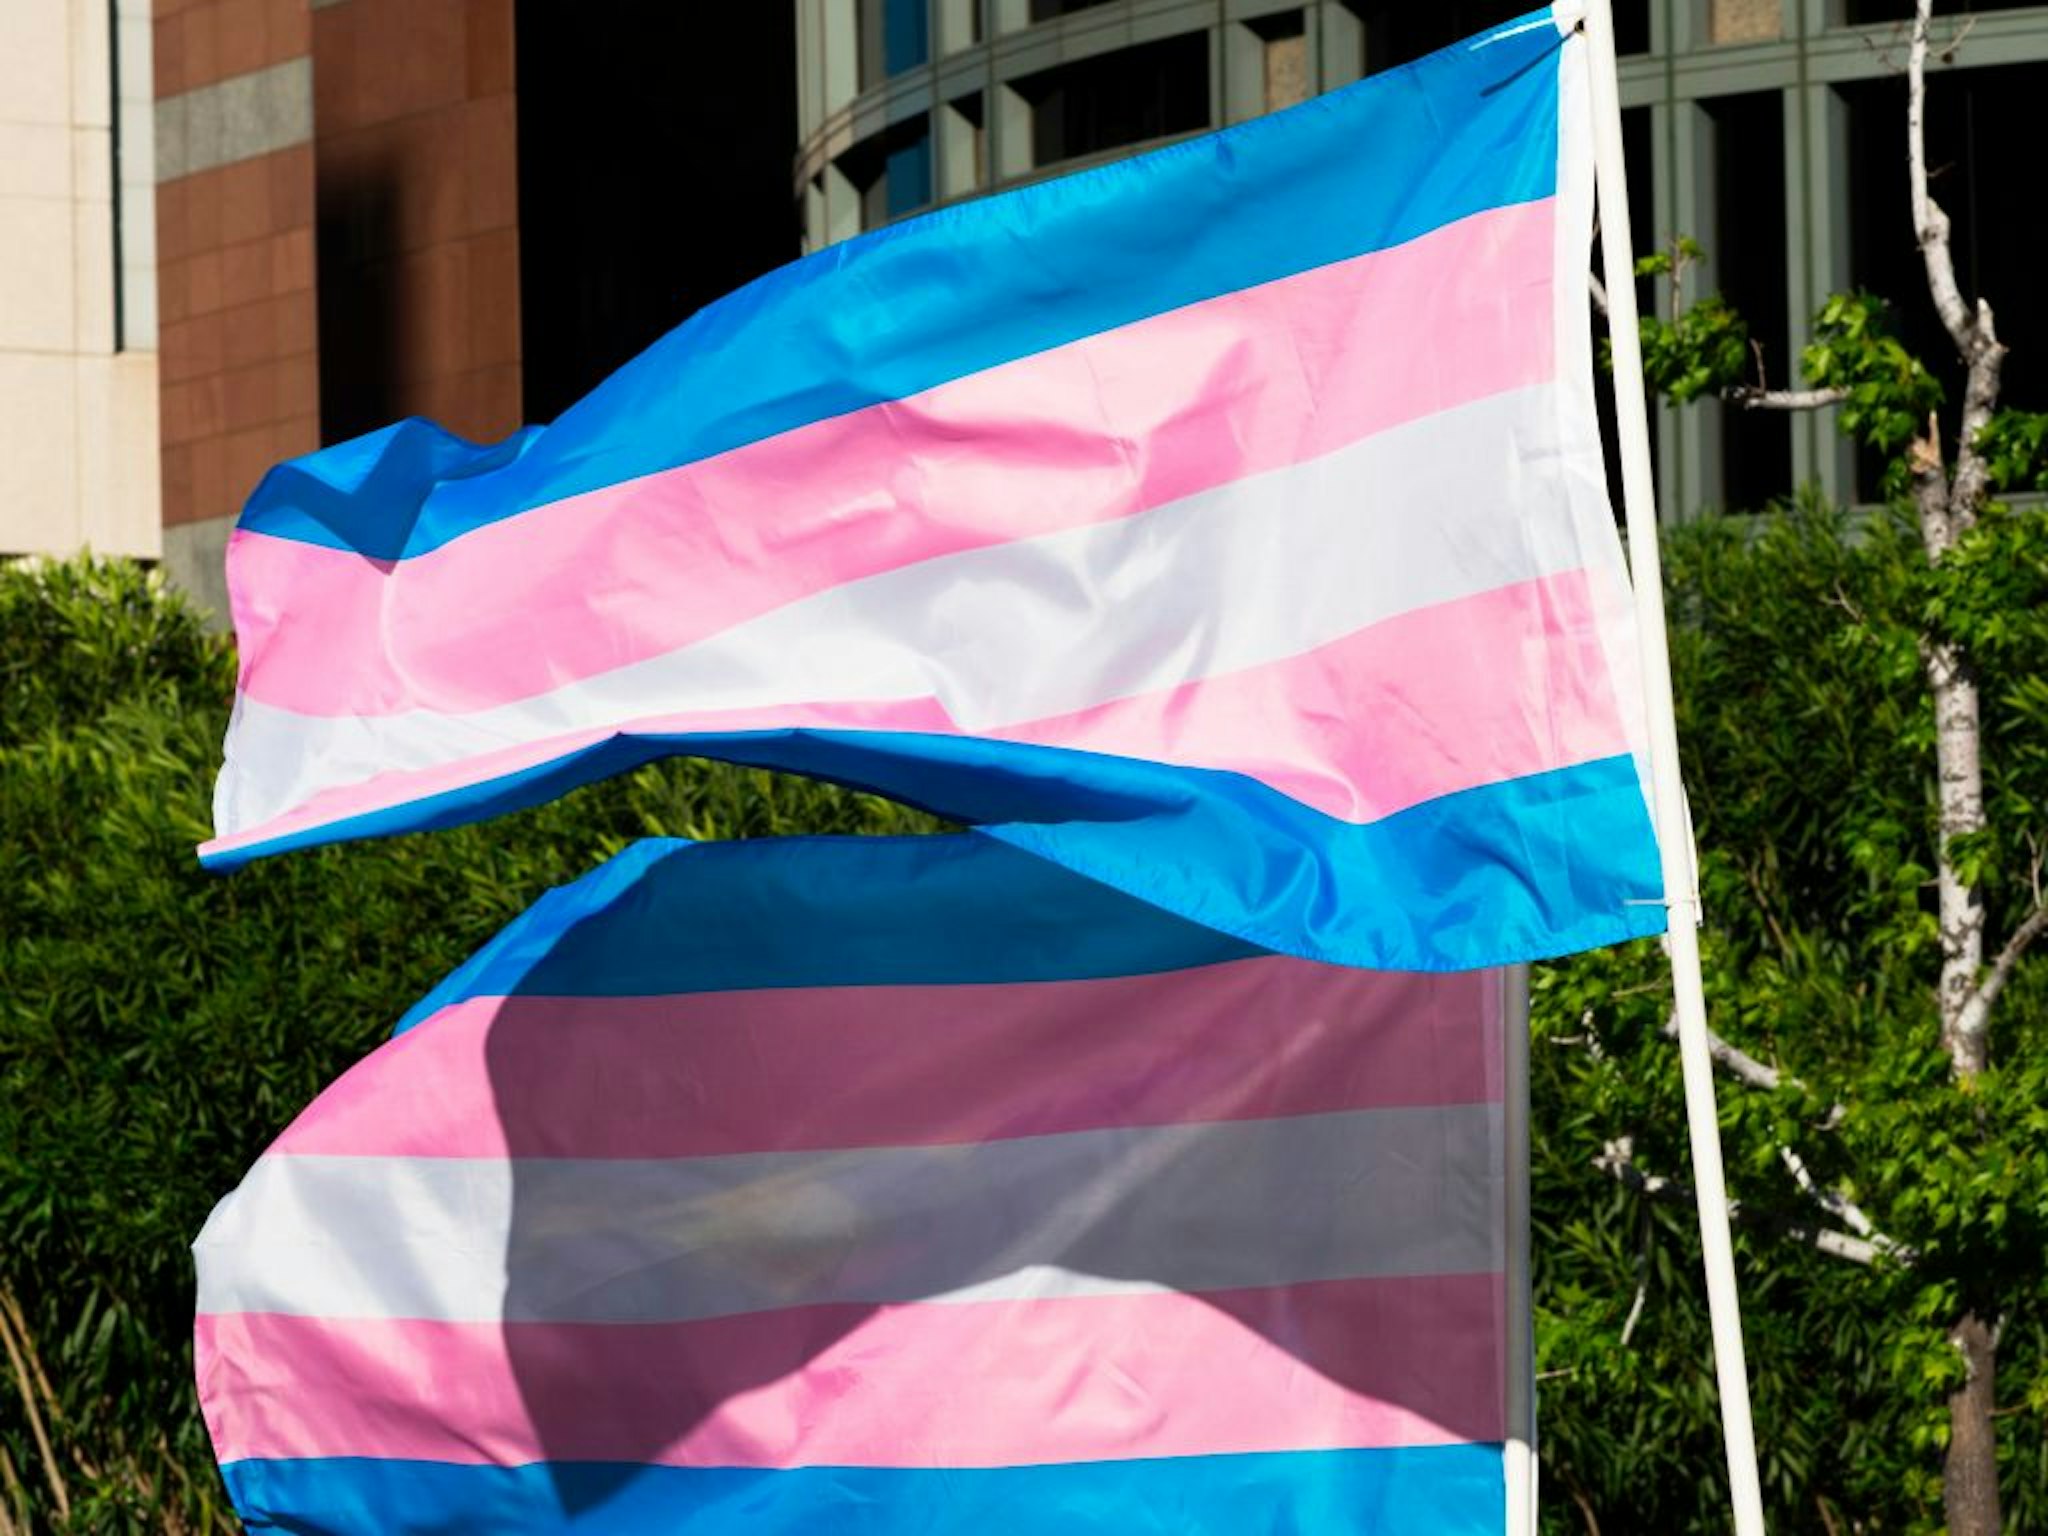 Trans pride flags flutter in the wind at a gathering to celebrate International Transgender Day of Visibility, March 31, 2017 at the Edward R. Roybal Federal Building in Los Angeles, California. International Transgender Day of Visibility is dedicated to celebrating transgender people and raising awareness of discrimination faced by transgender people worldwide.